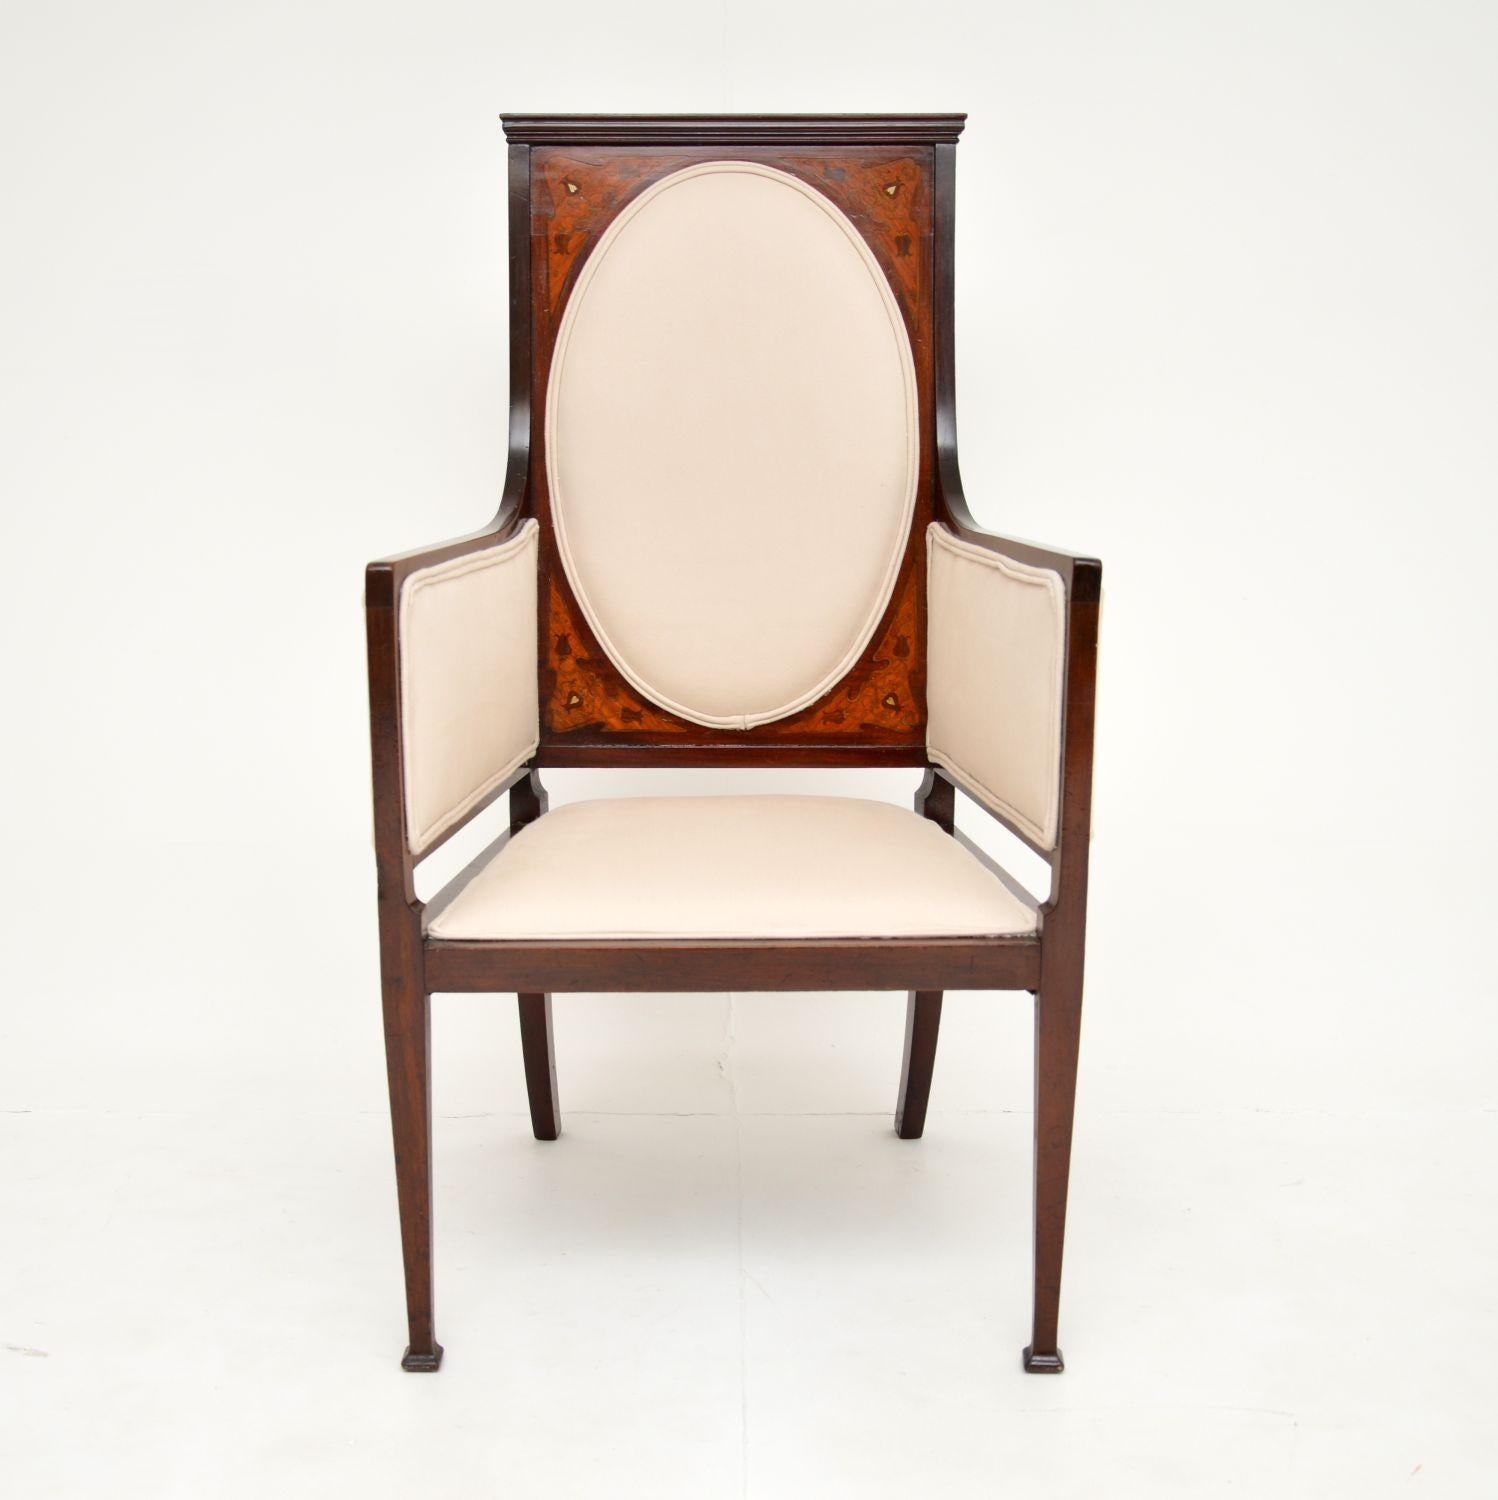 A fine antique Art Nouveau armchair with exquisite inlaid designs. This was made in England, it dates from around 1890’s period.

This armchair looks like the typical item that originally would have been sold by Liberty of London.

It has amazing